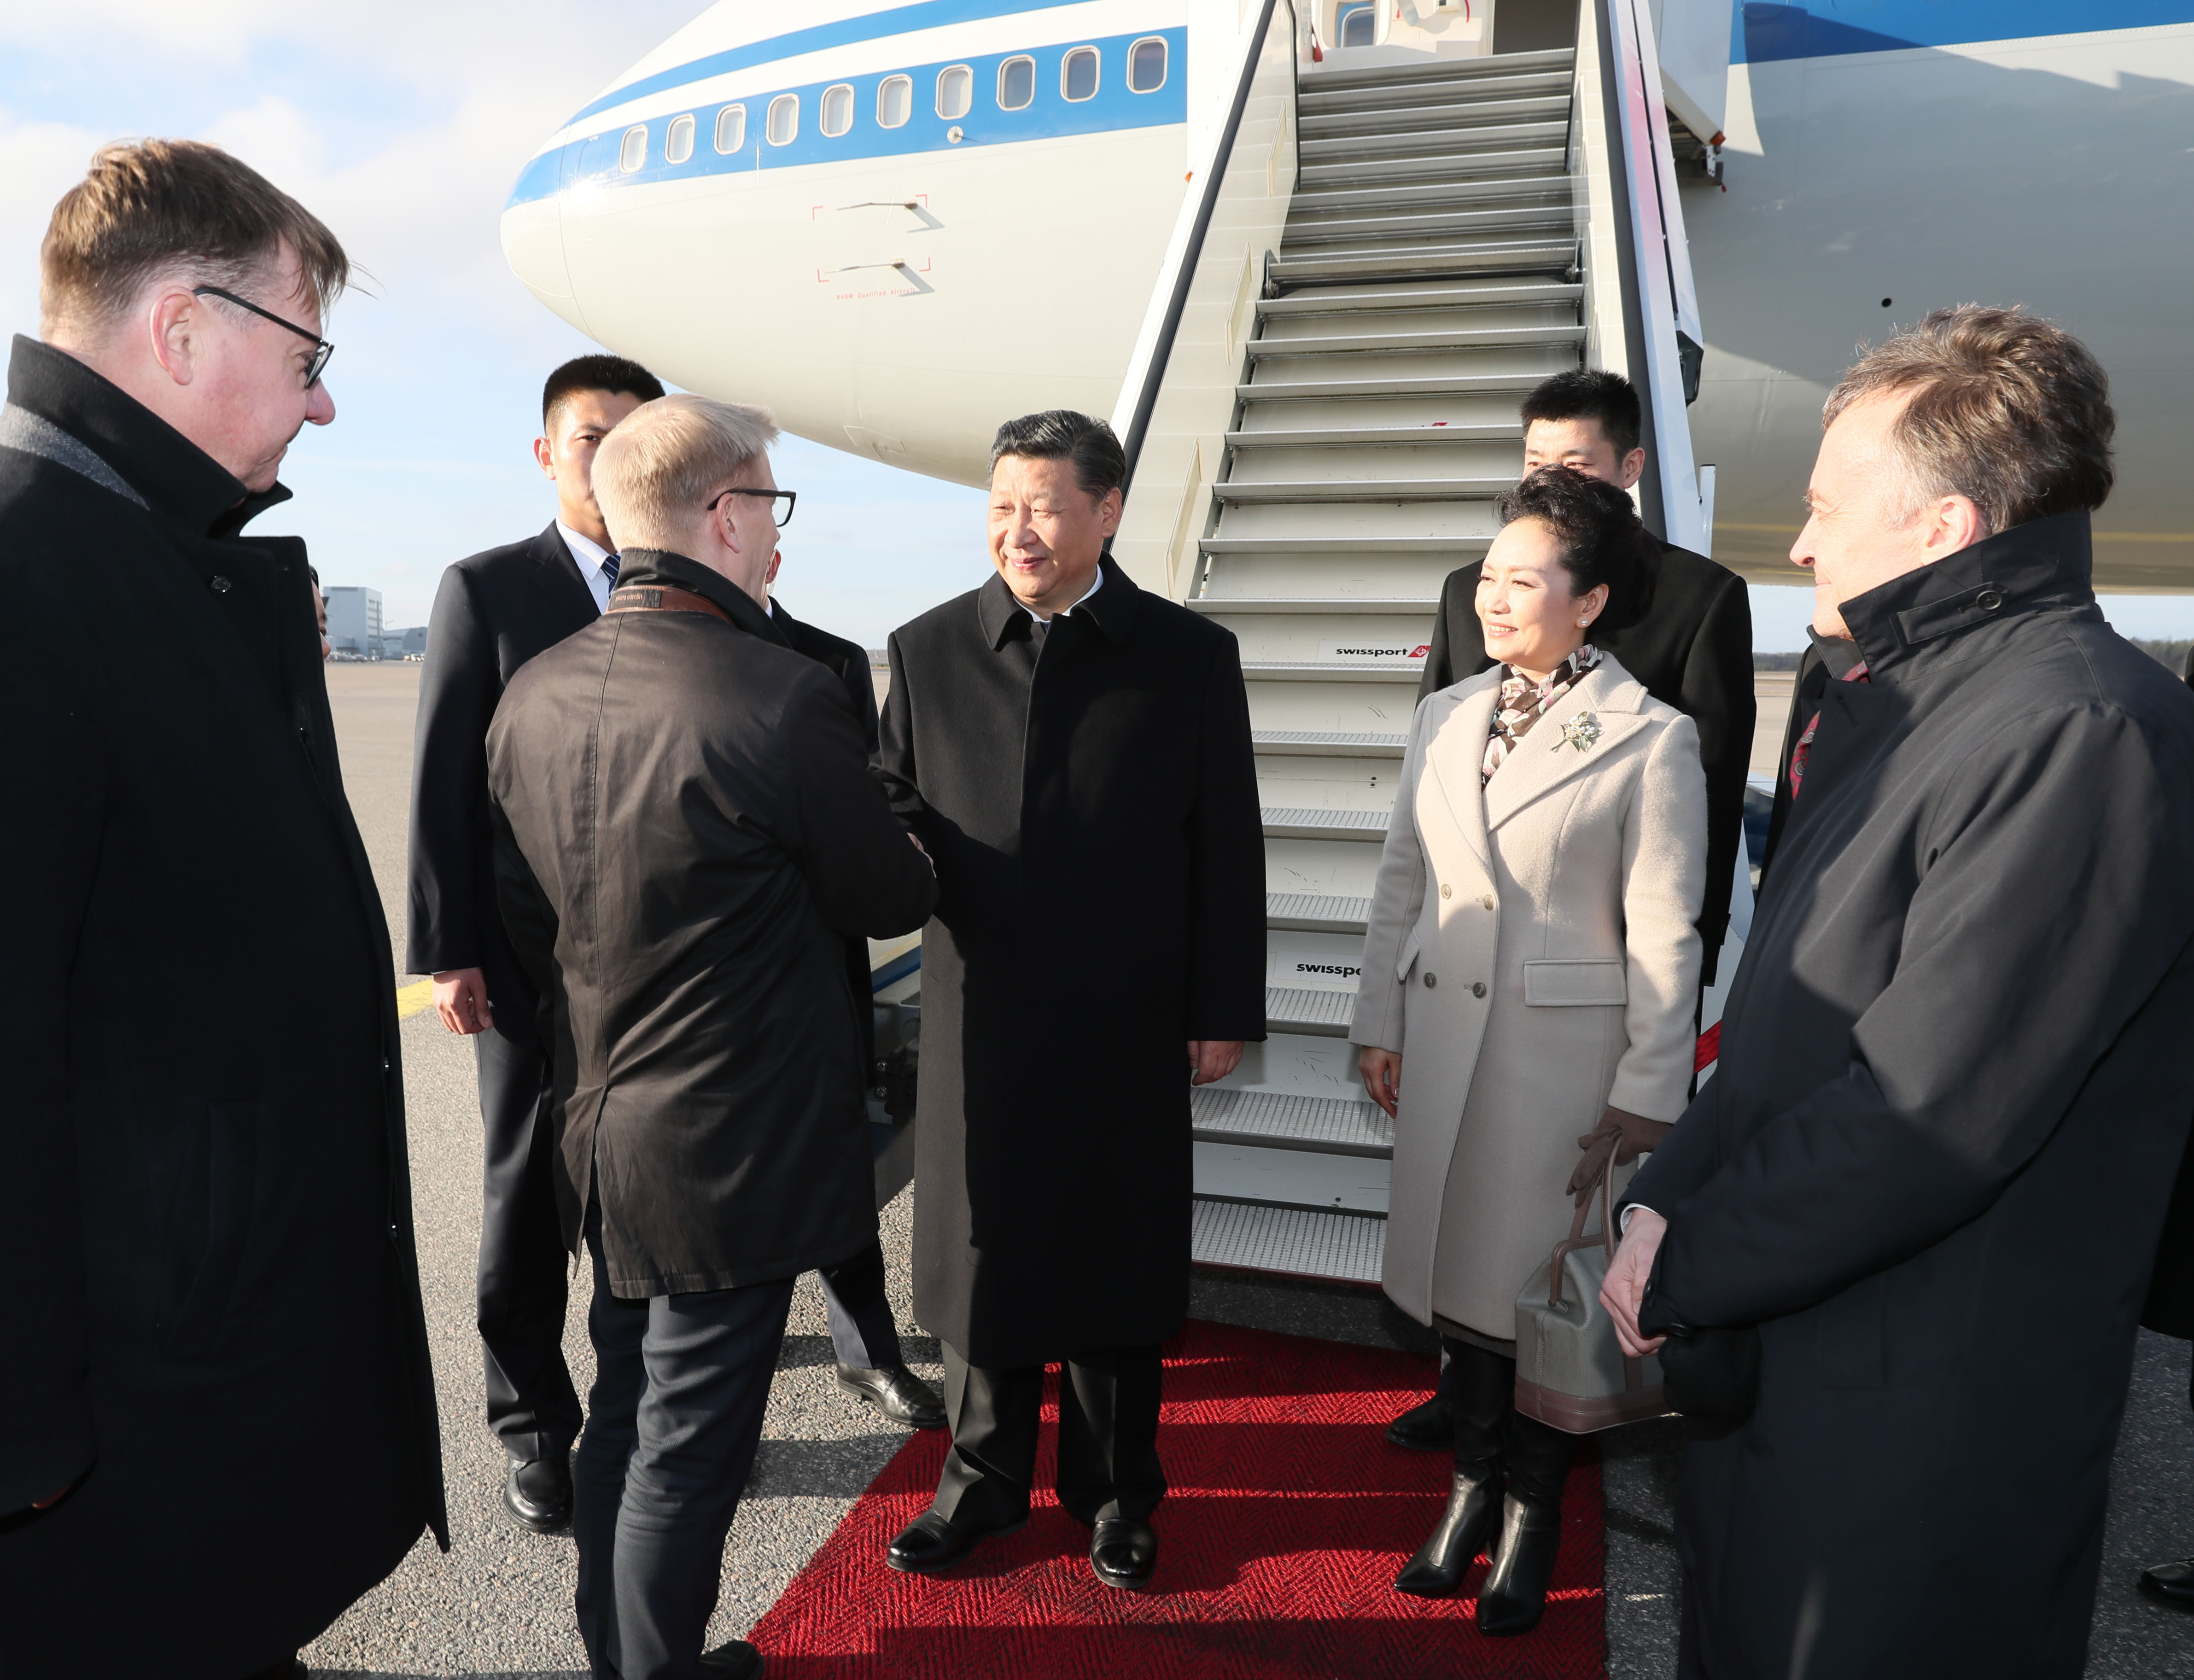 Chinese President Xi Jinping (Center) and his wife Peng Liyuan are welcomed by Finnish Minister of Agriculture and the Environment Kimmo Tiilikainen at the airport upon their arrival in Helsinki, Finland, on April 4, 2017. Chinese President Xi Jinping is paying a state visit to Finland. [Photo: Xinhua/Lan Hongguang]